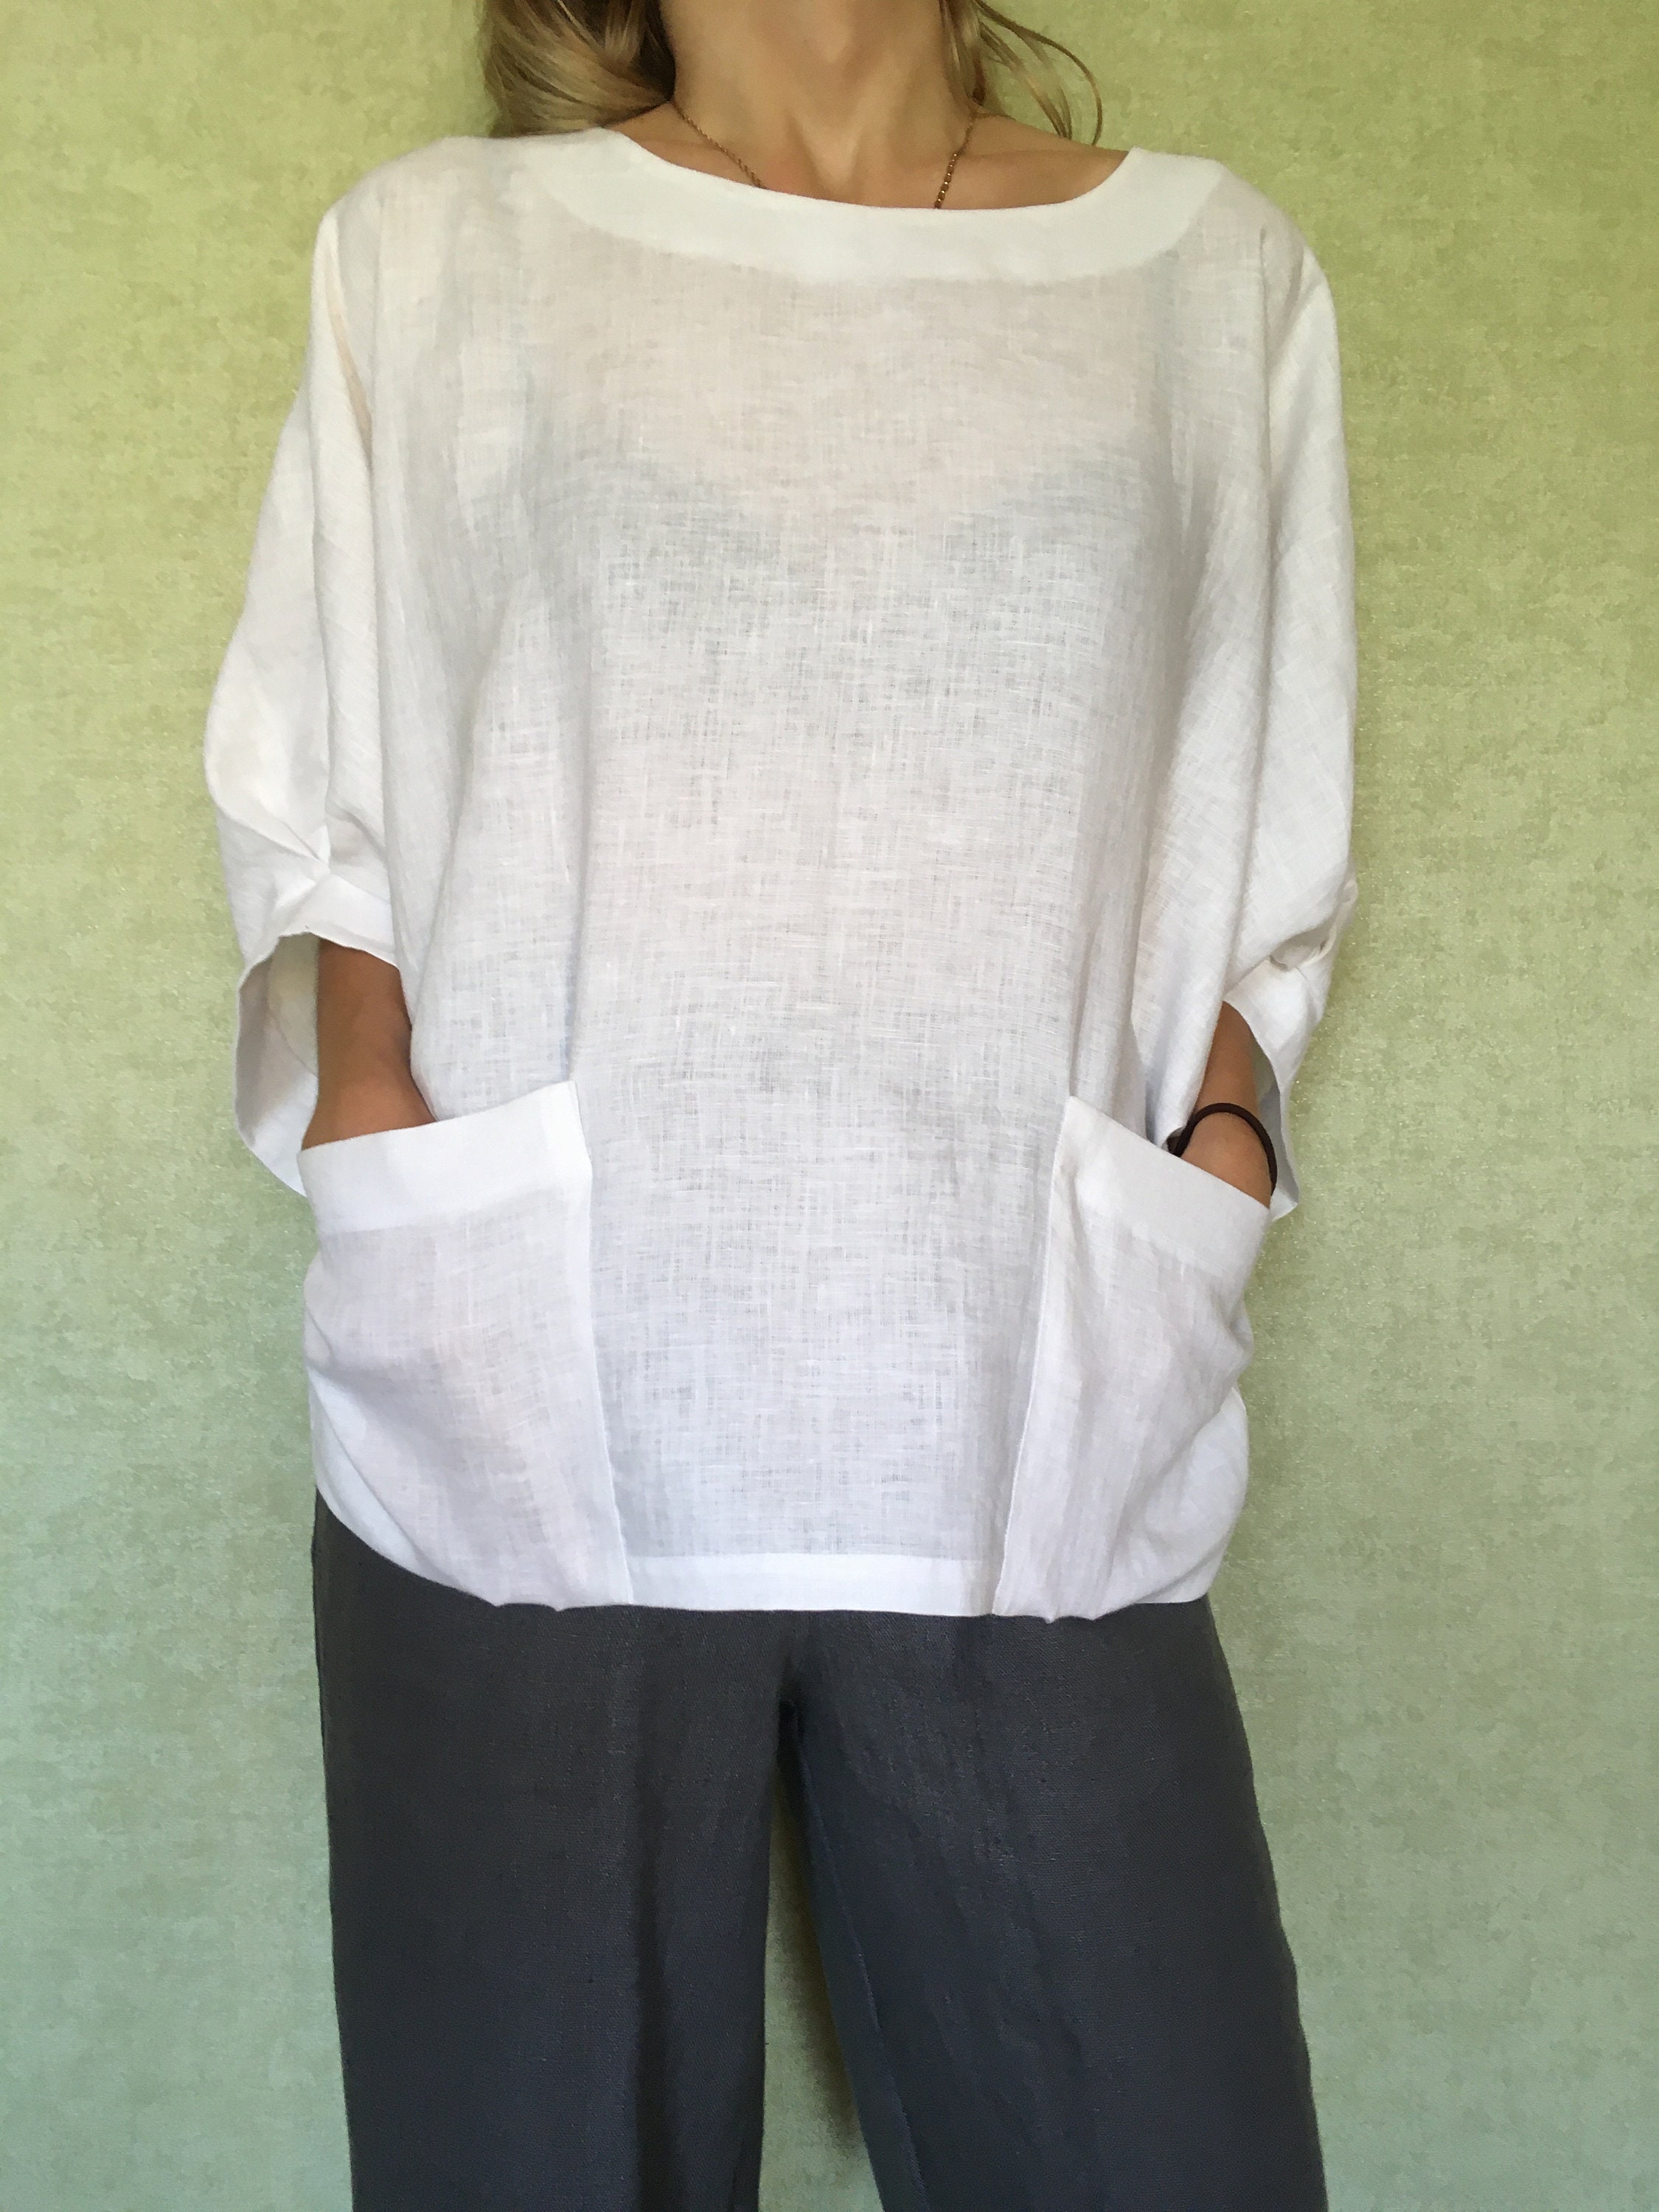 Linen Tunic With Pockets/linen Maternity Top/oversized Basic | Etsy